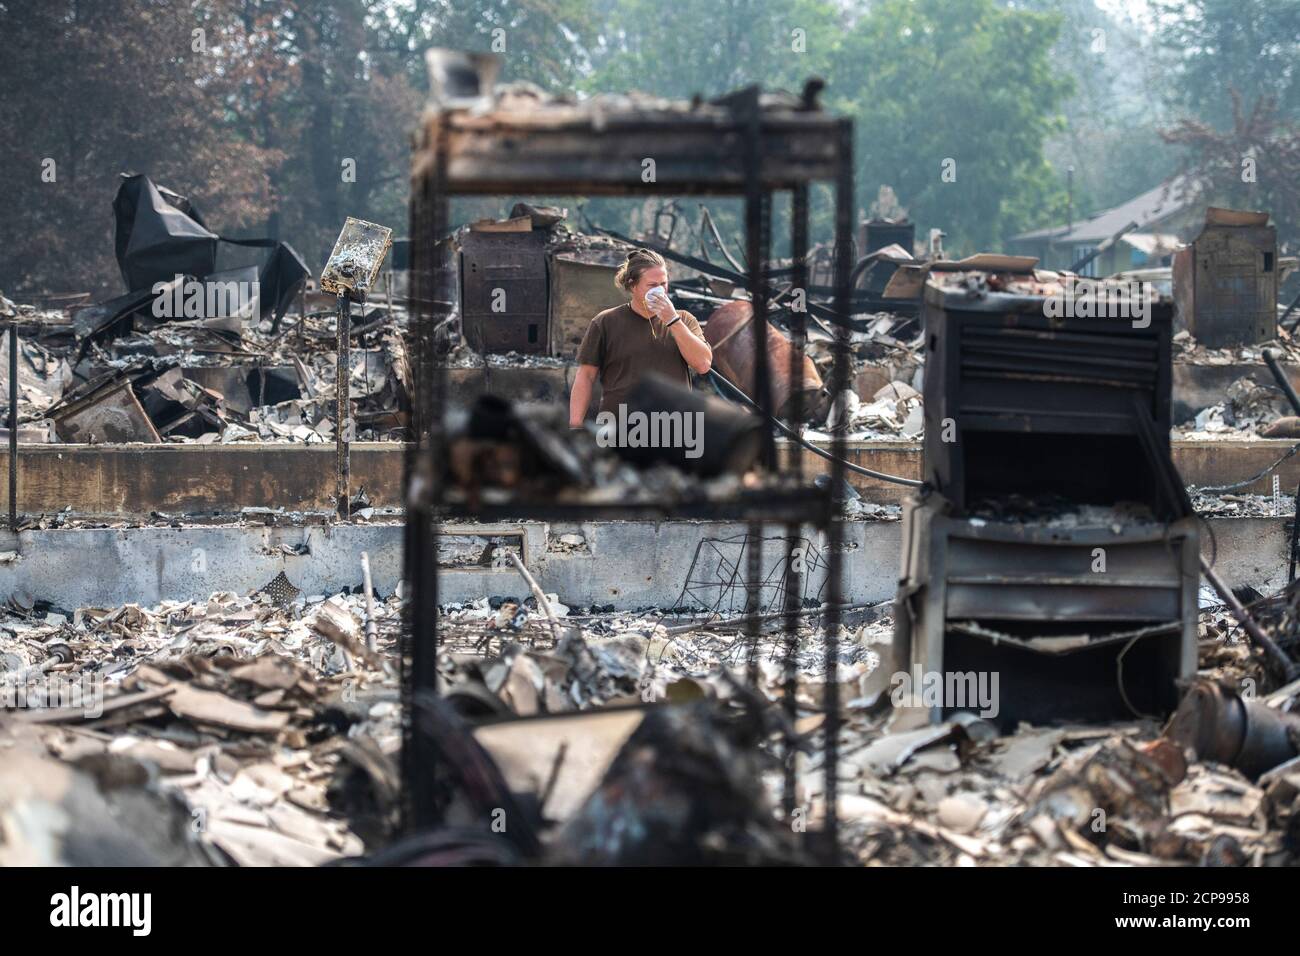 Talent, Ore. 18th Sep, 2020. Zach Kuhlow checks the remnants of his house for anything salvagable. His son, who is now 10, was born inside the house. In Talent, about 20 miles north of the California border, homes were charred beyond recognition. Across the western US, at least 87 wildfires are burning, according to the National Interagency Fire Center. They've torched more than 4.7 million acres -- more than six times the area of Rhode Island. Credit: Chris Tuite/Image Space/Media Punch/Alamy Live News Stock Photo